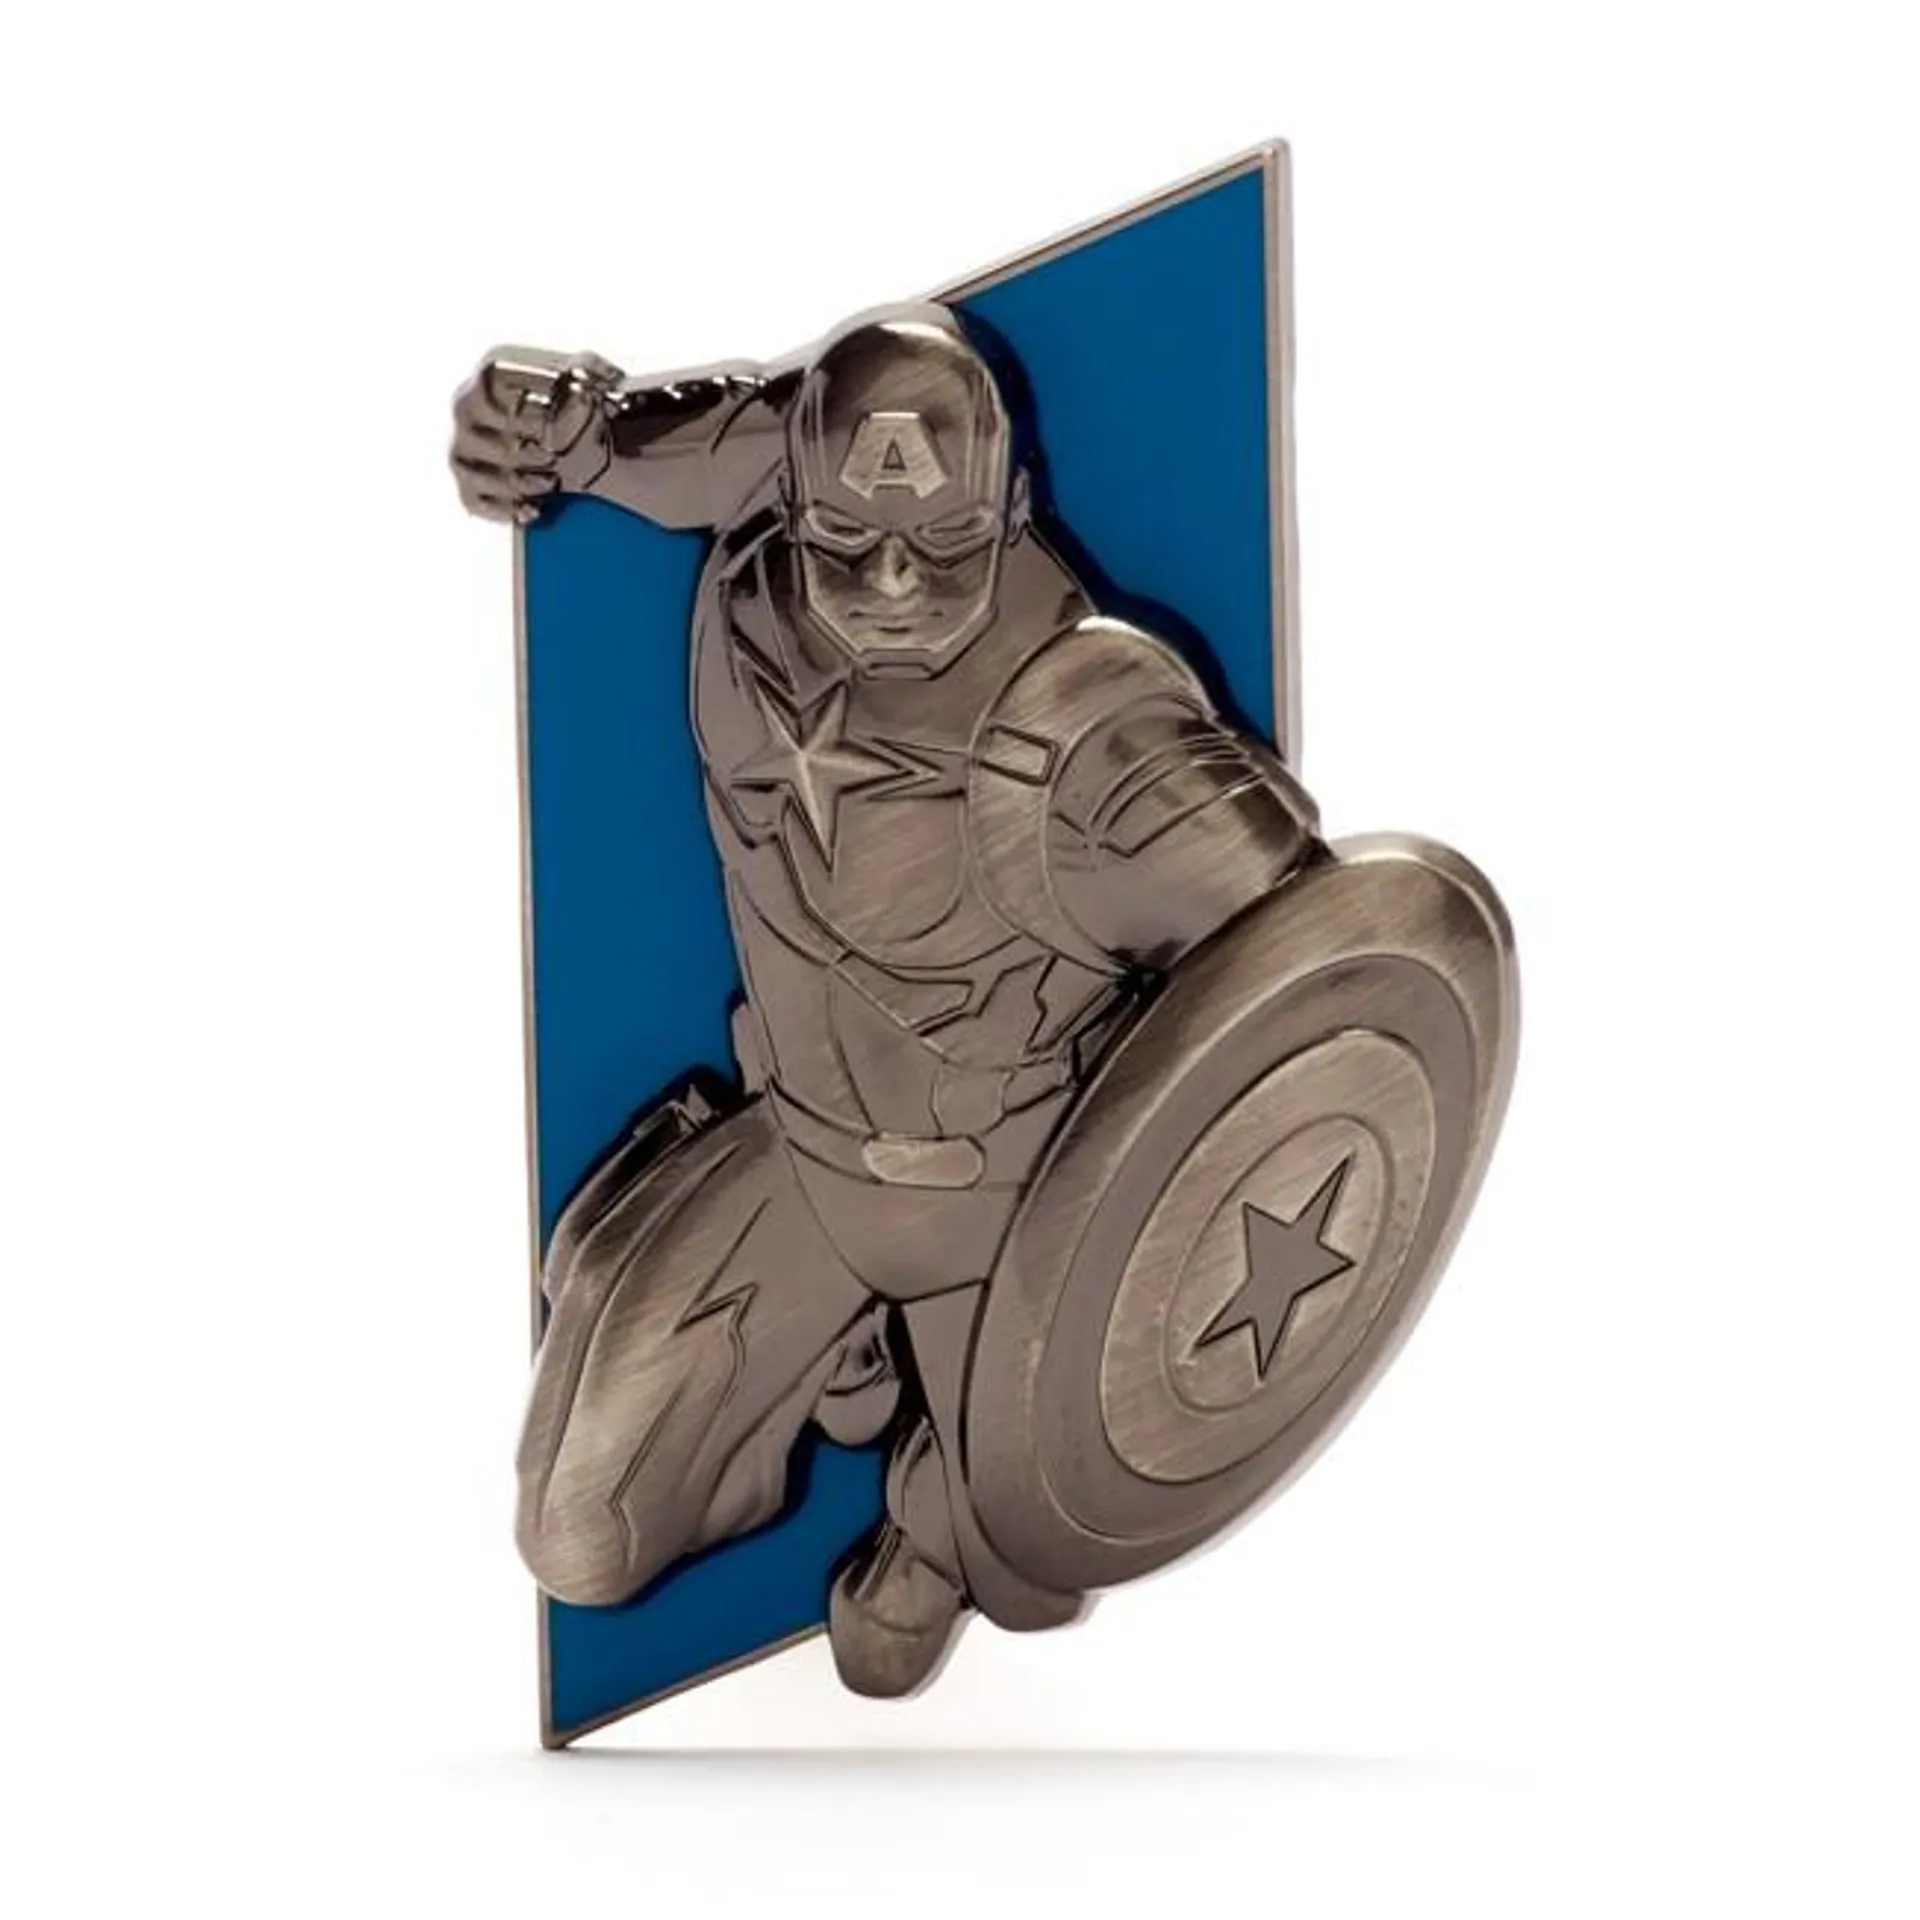 Disney Store Captain America Limited Edition Pin